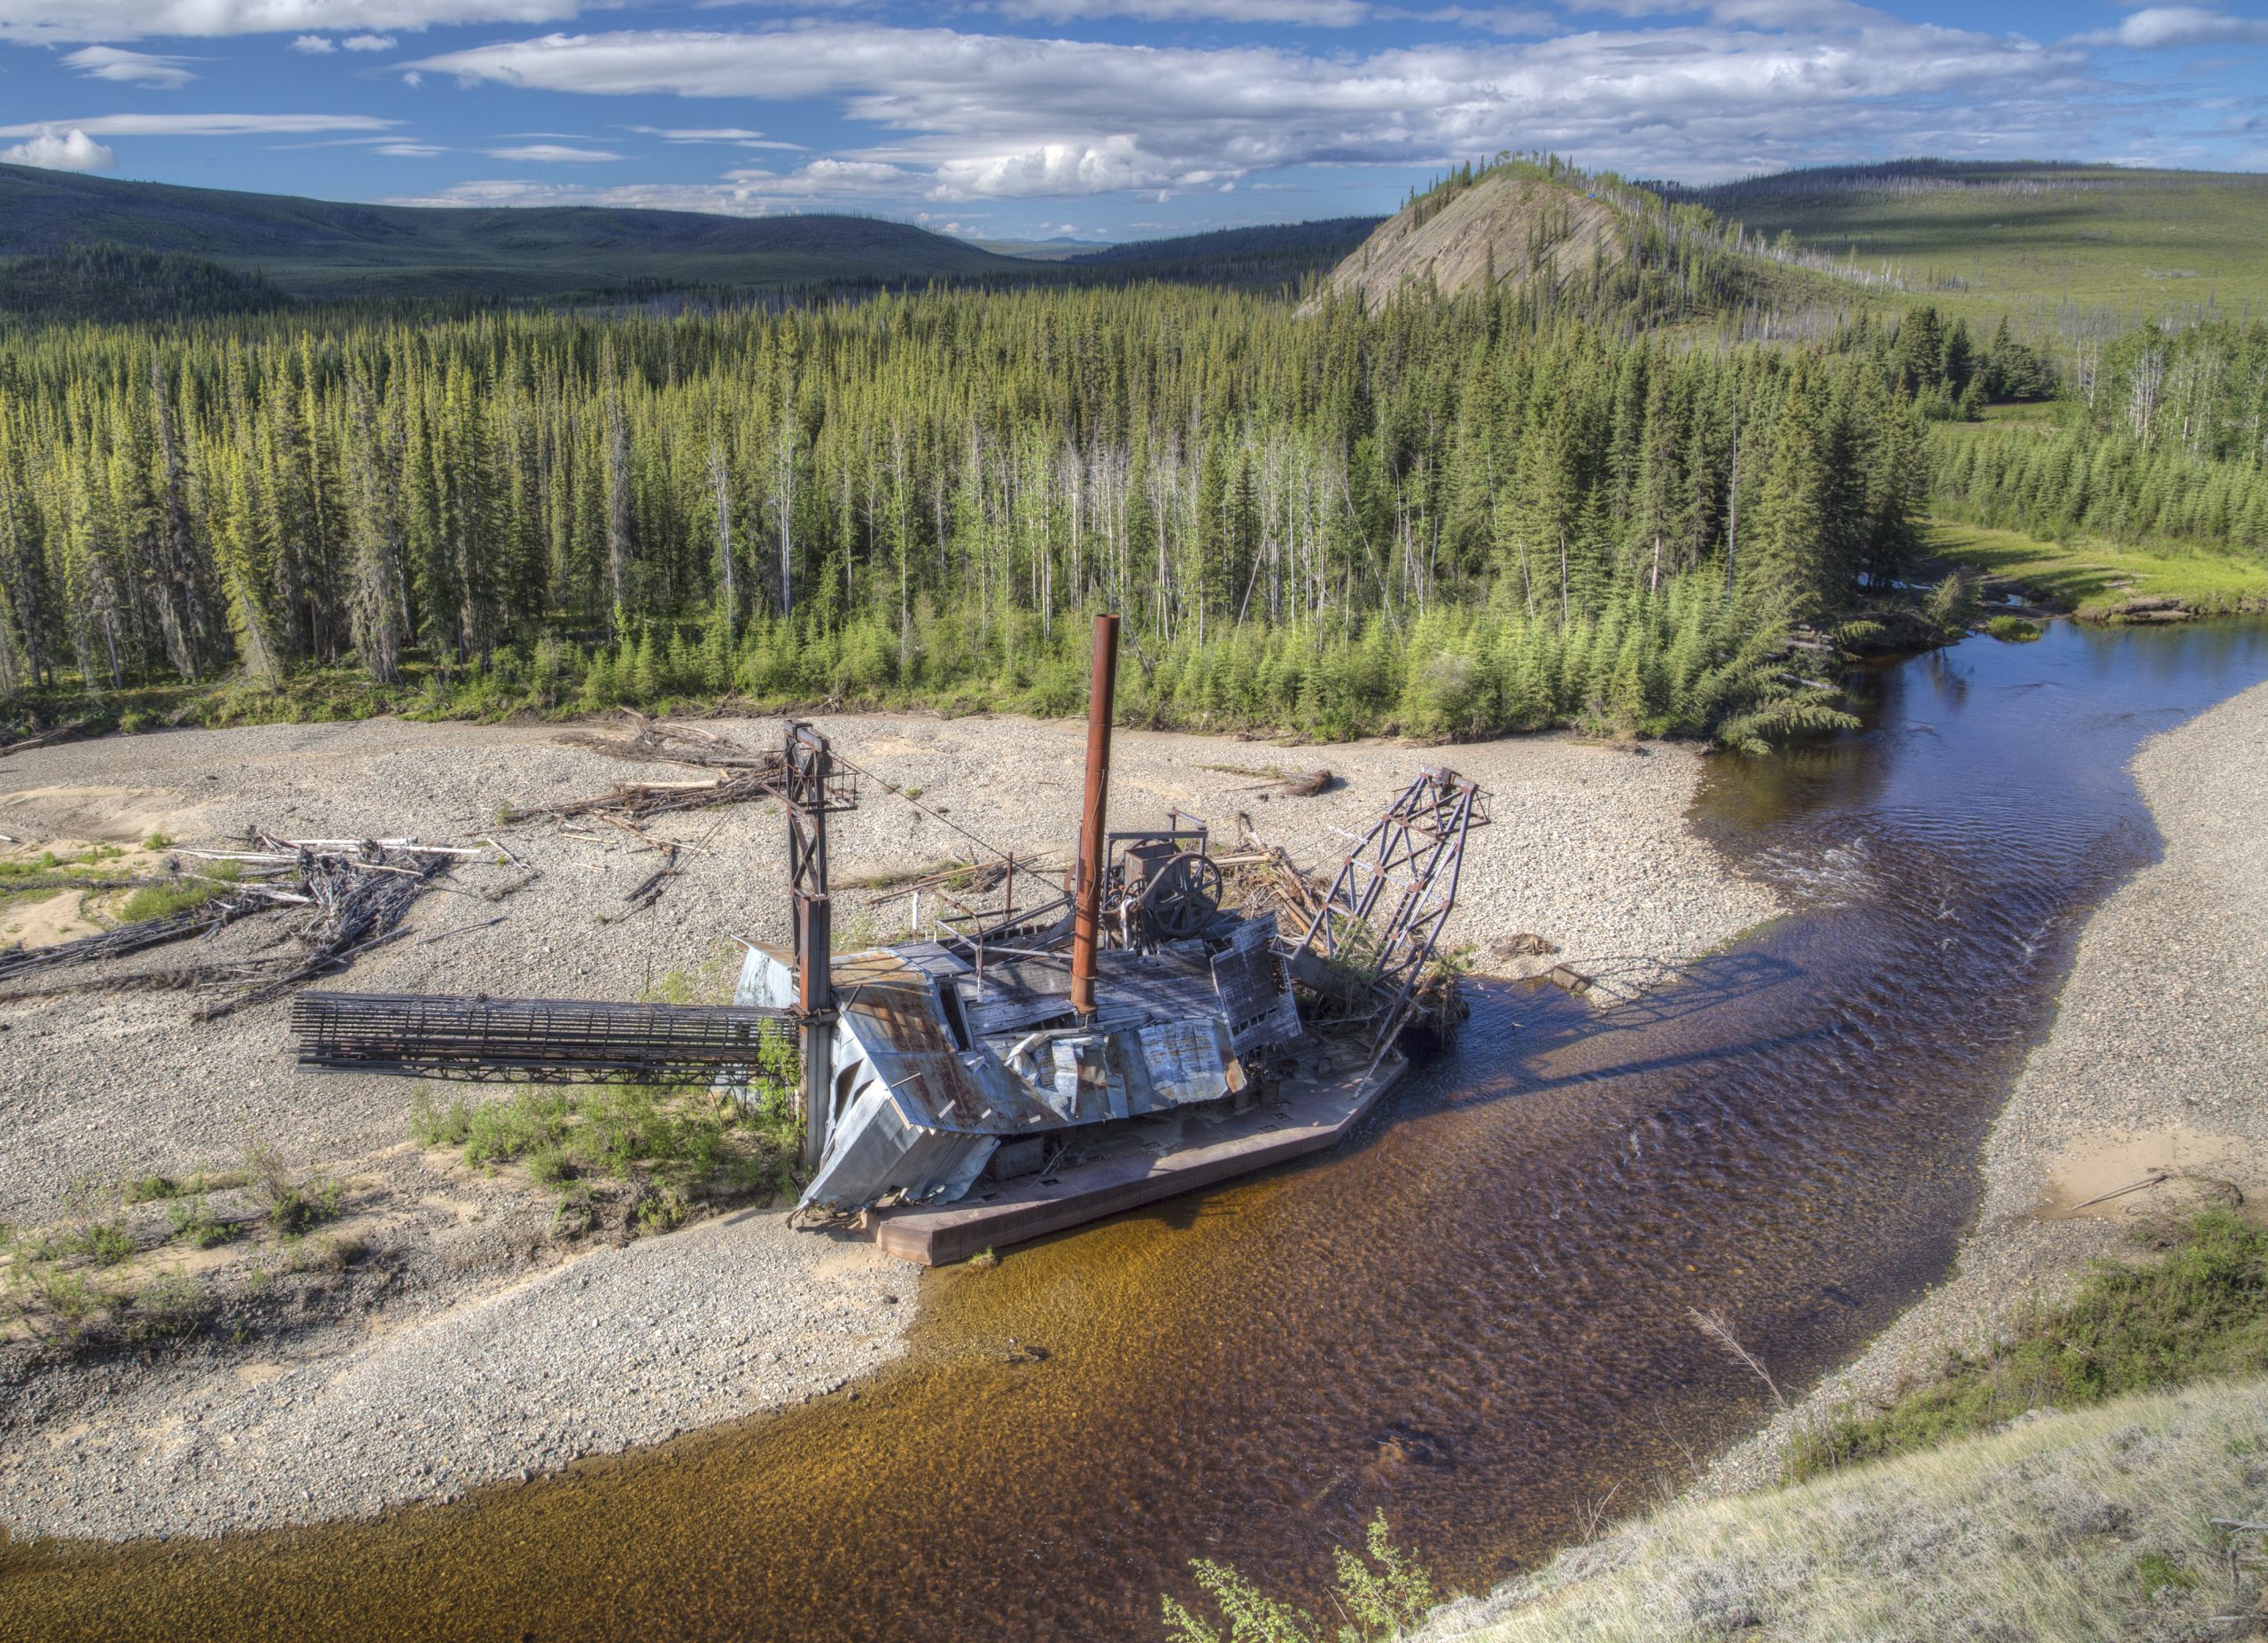 Collapse gold mining apparatus or dredging platform, along the rocky bank of a shallow stream.